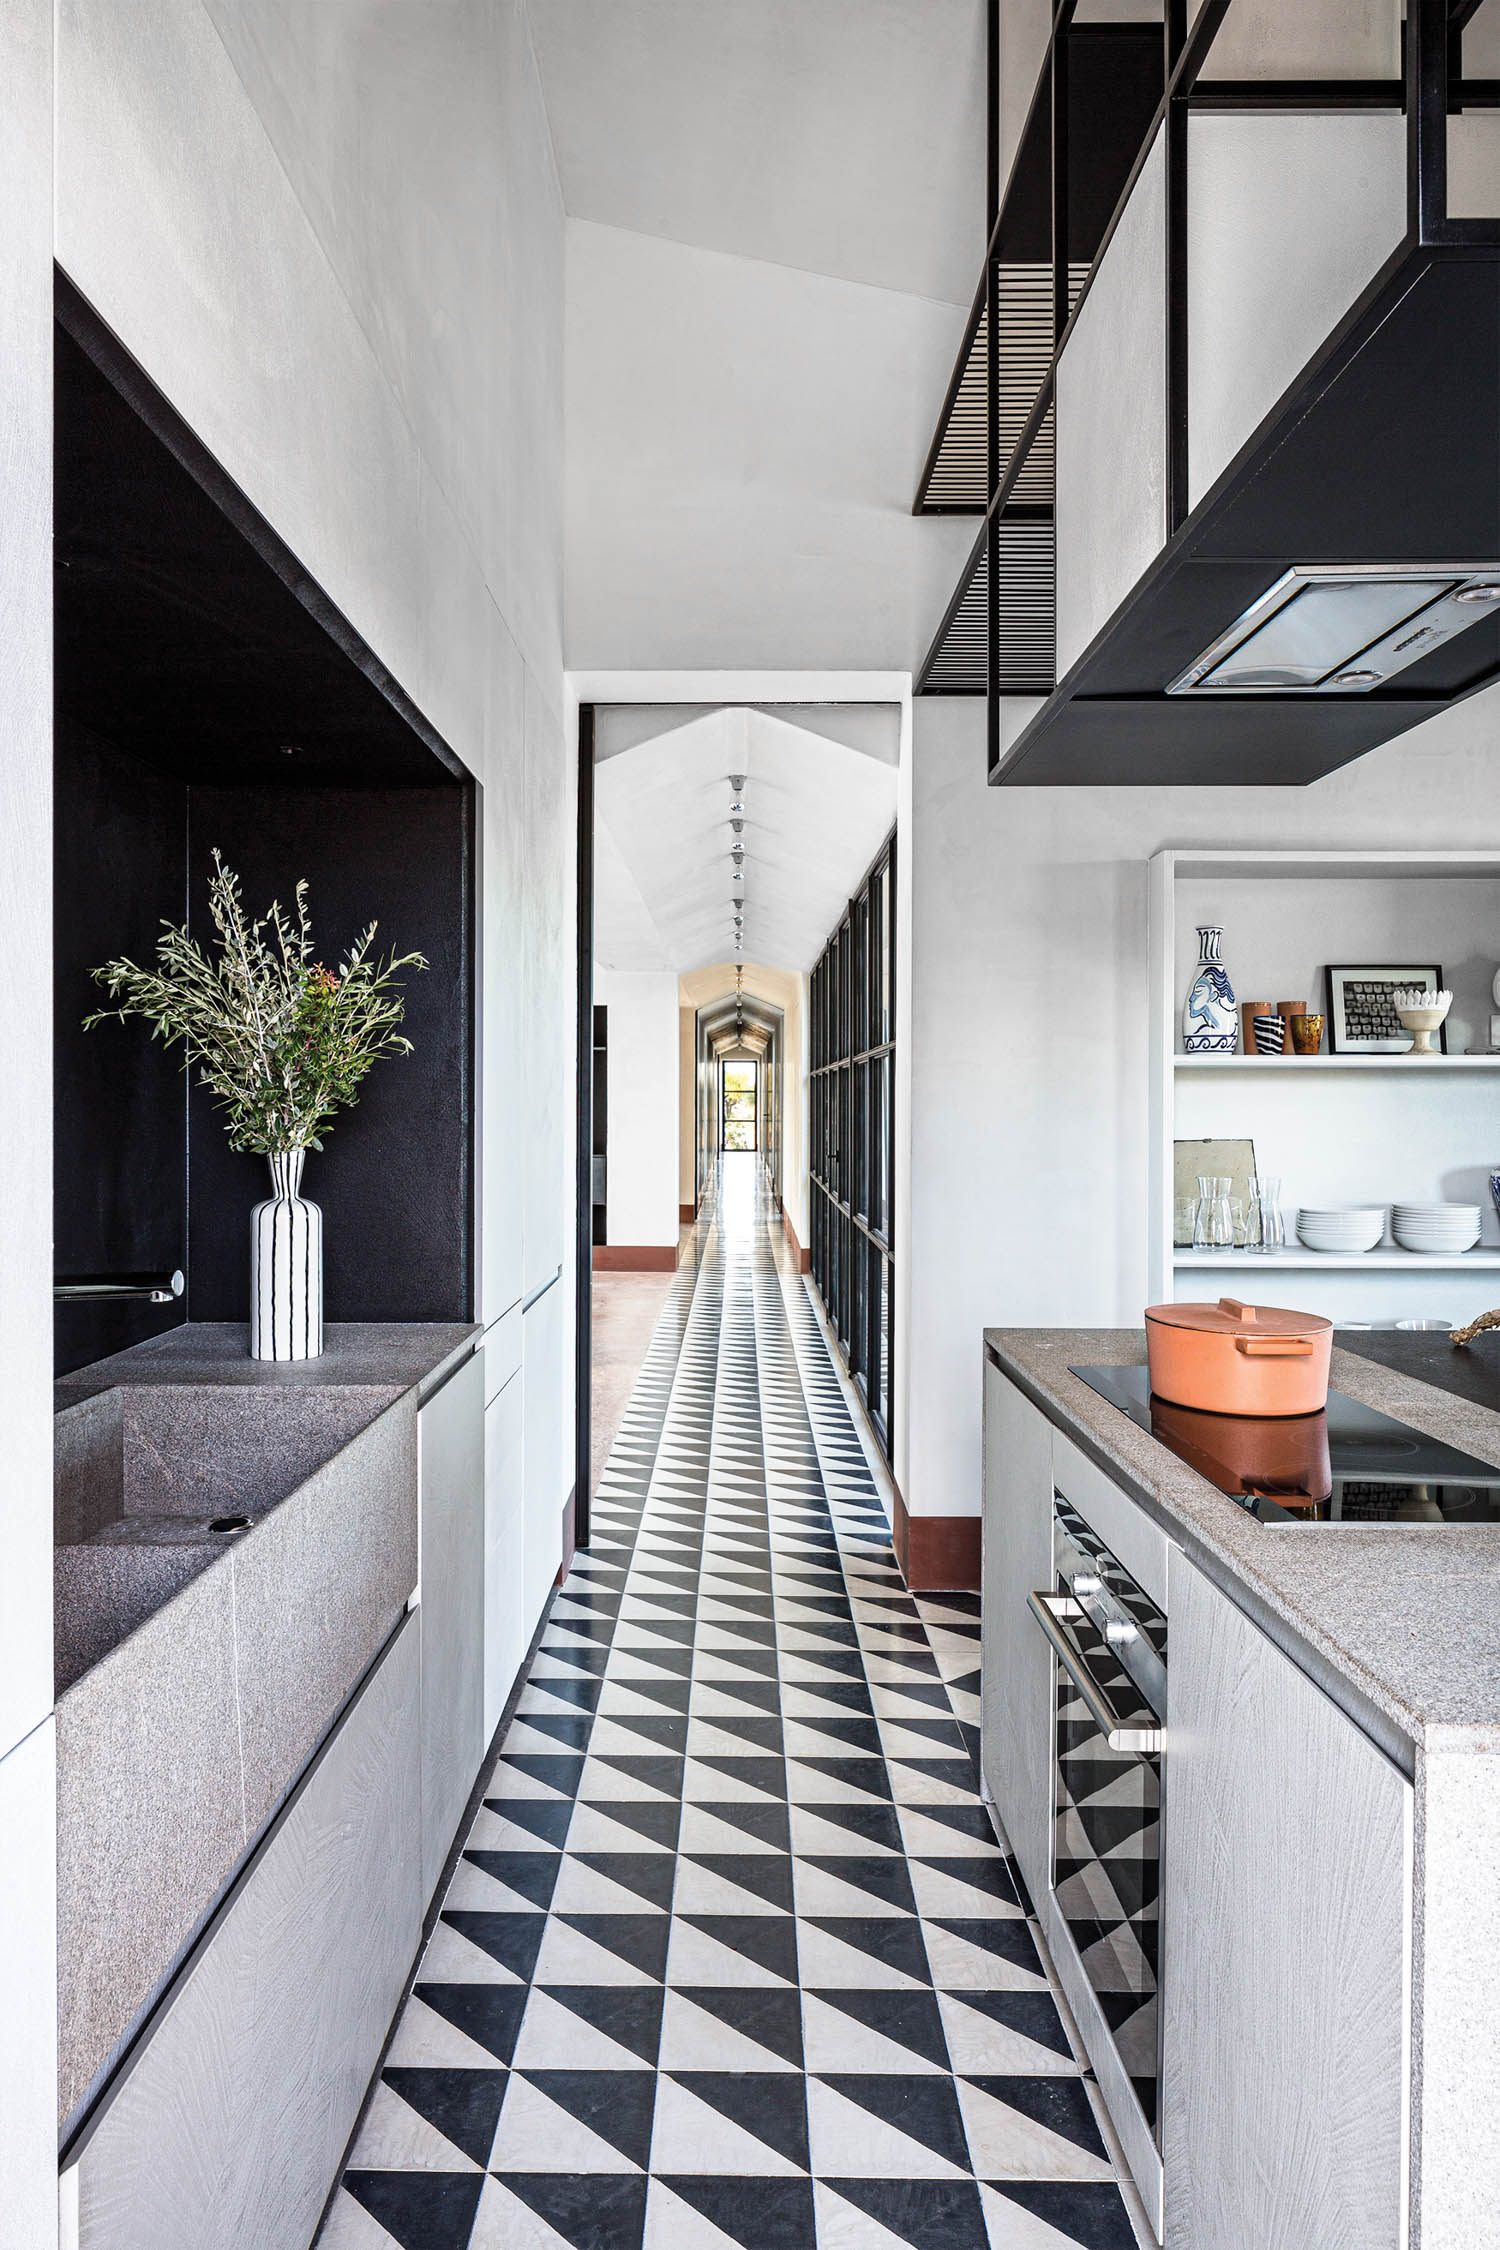 a black and white cement tile hallway from the kitchen to the other side of the house